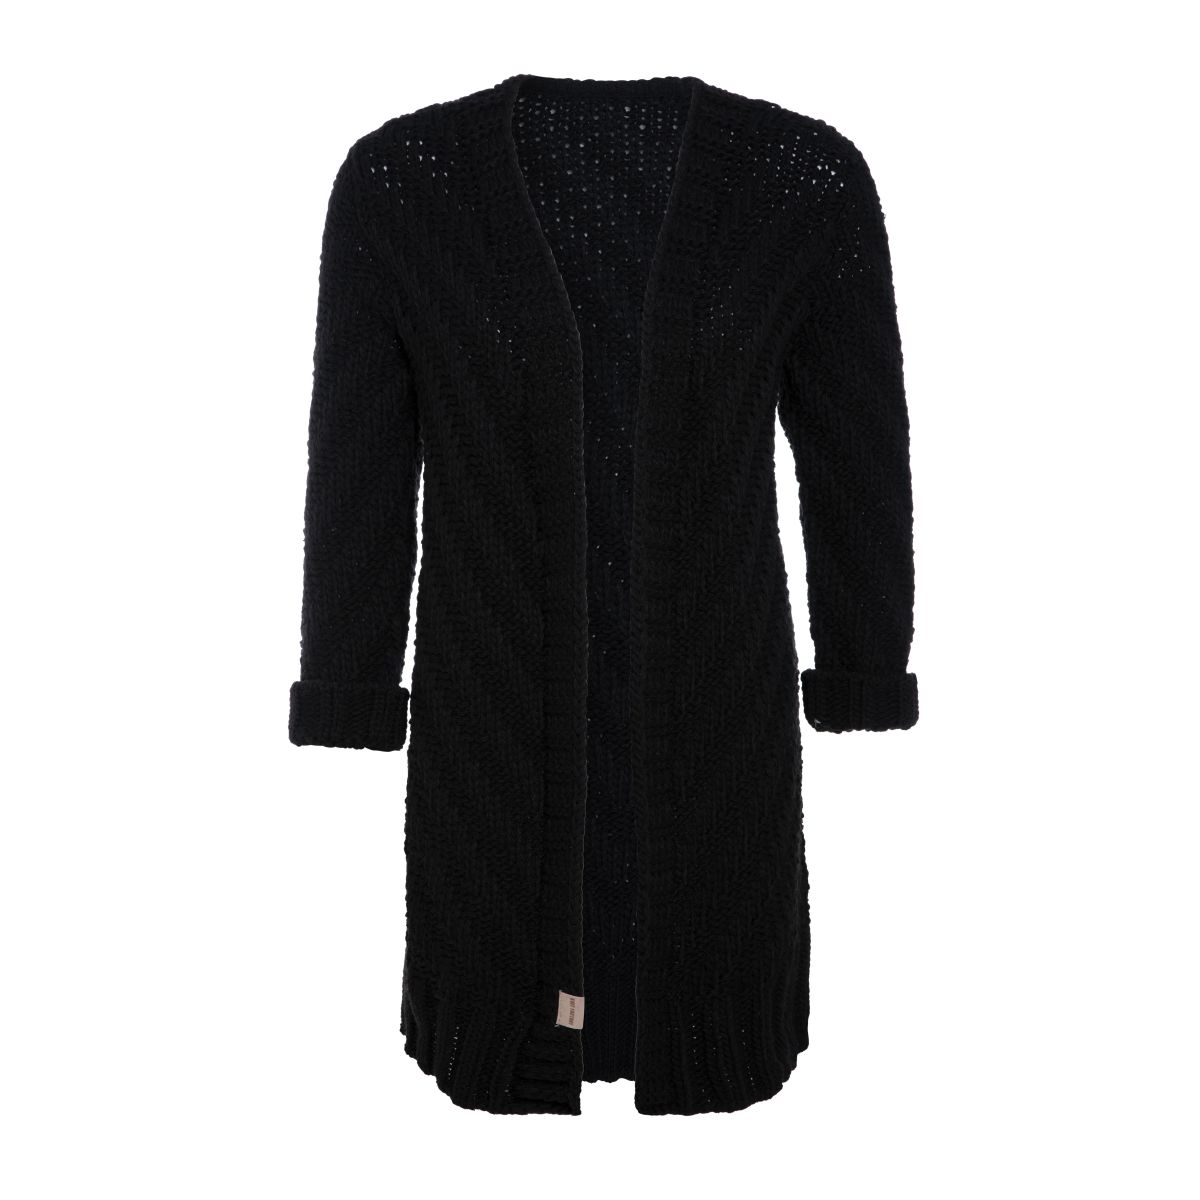 sally knitted cardigan black 4042